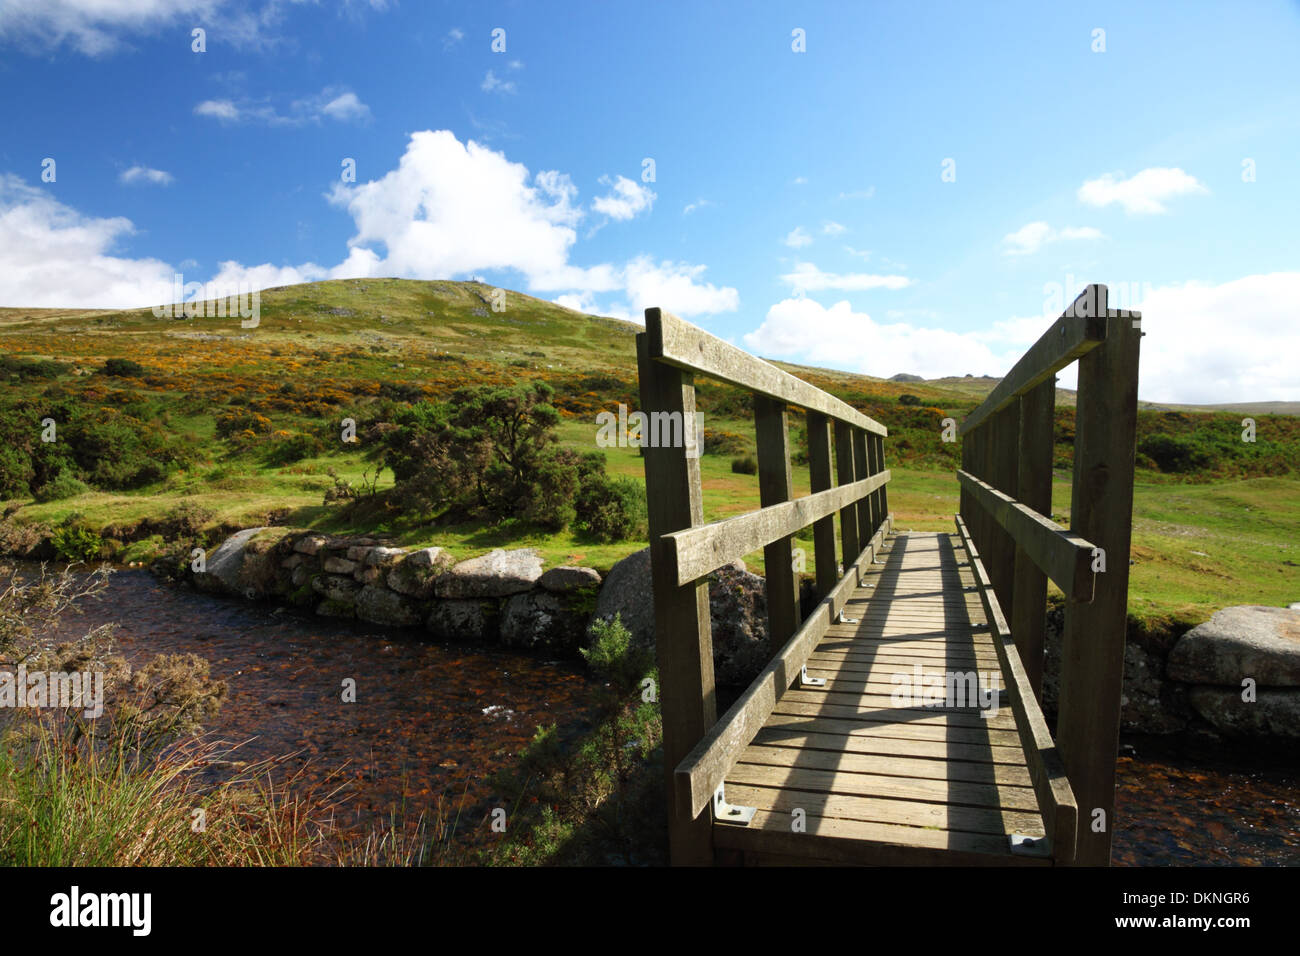 A wooden pedestrian bridge with a view of Dartmoor in the background. Stock Photo